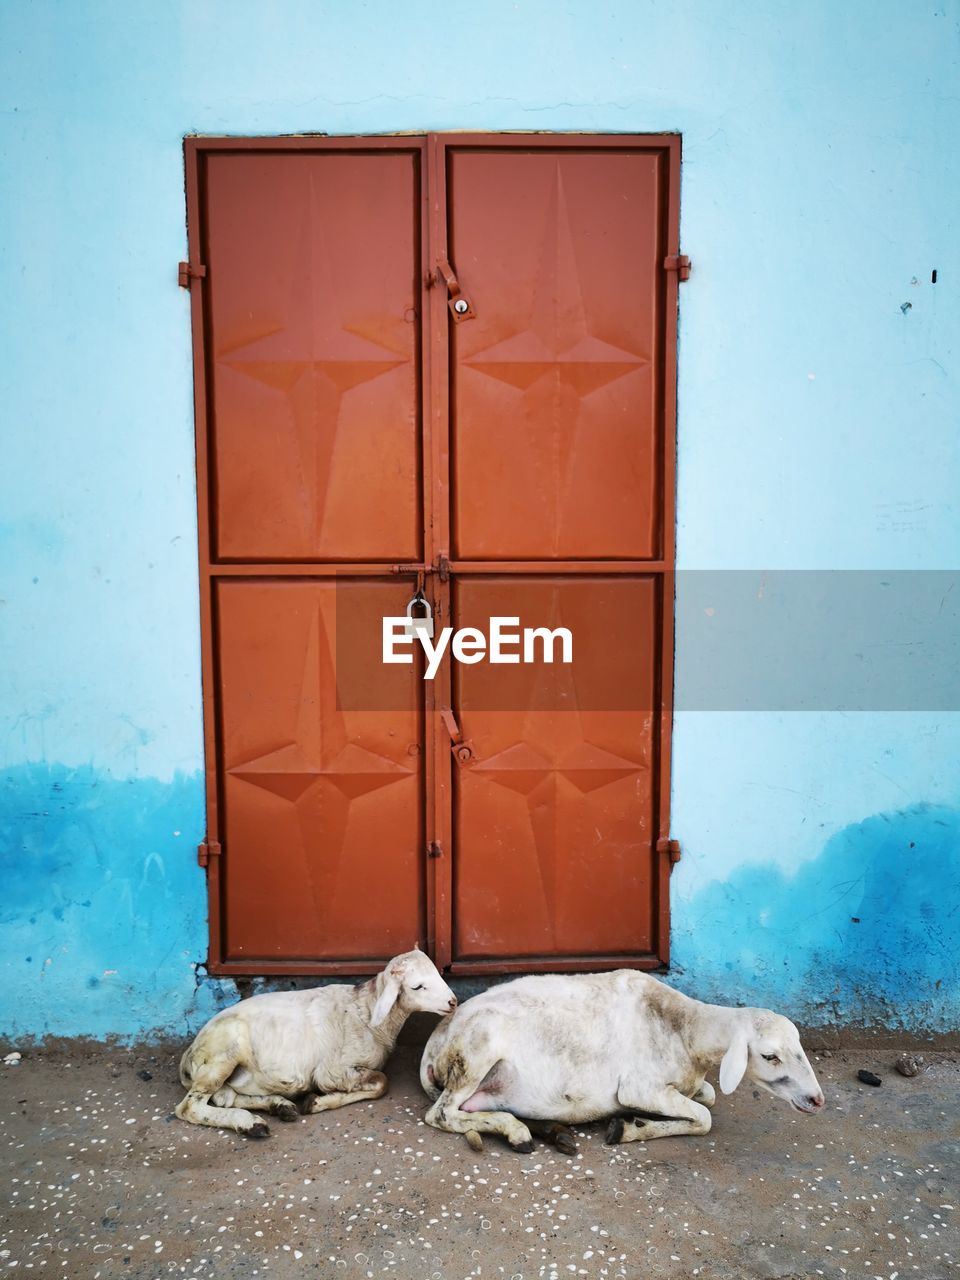 VIEW OF A DOG WITH CLOSED BLUE DOOR